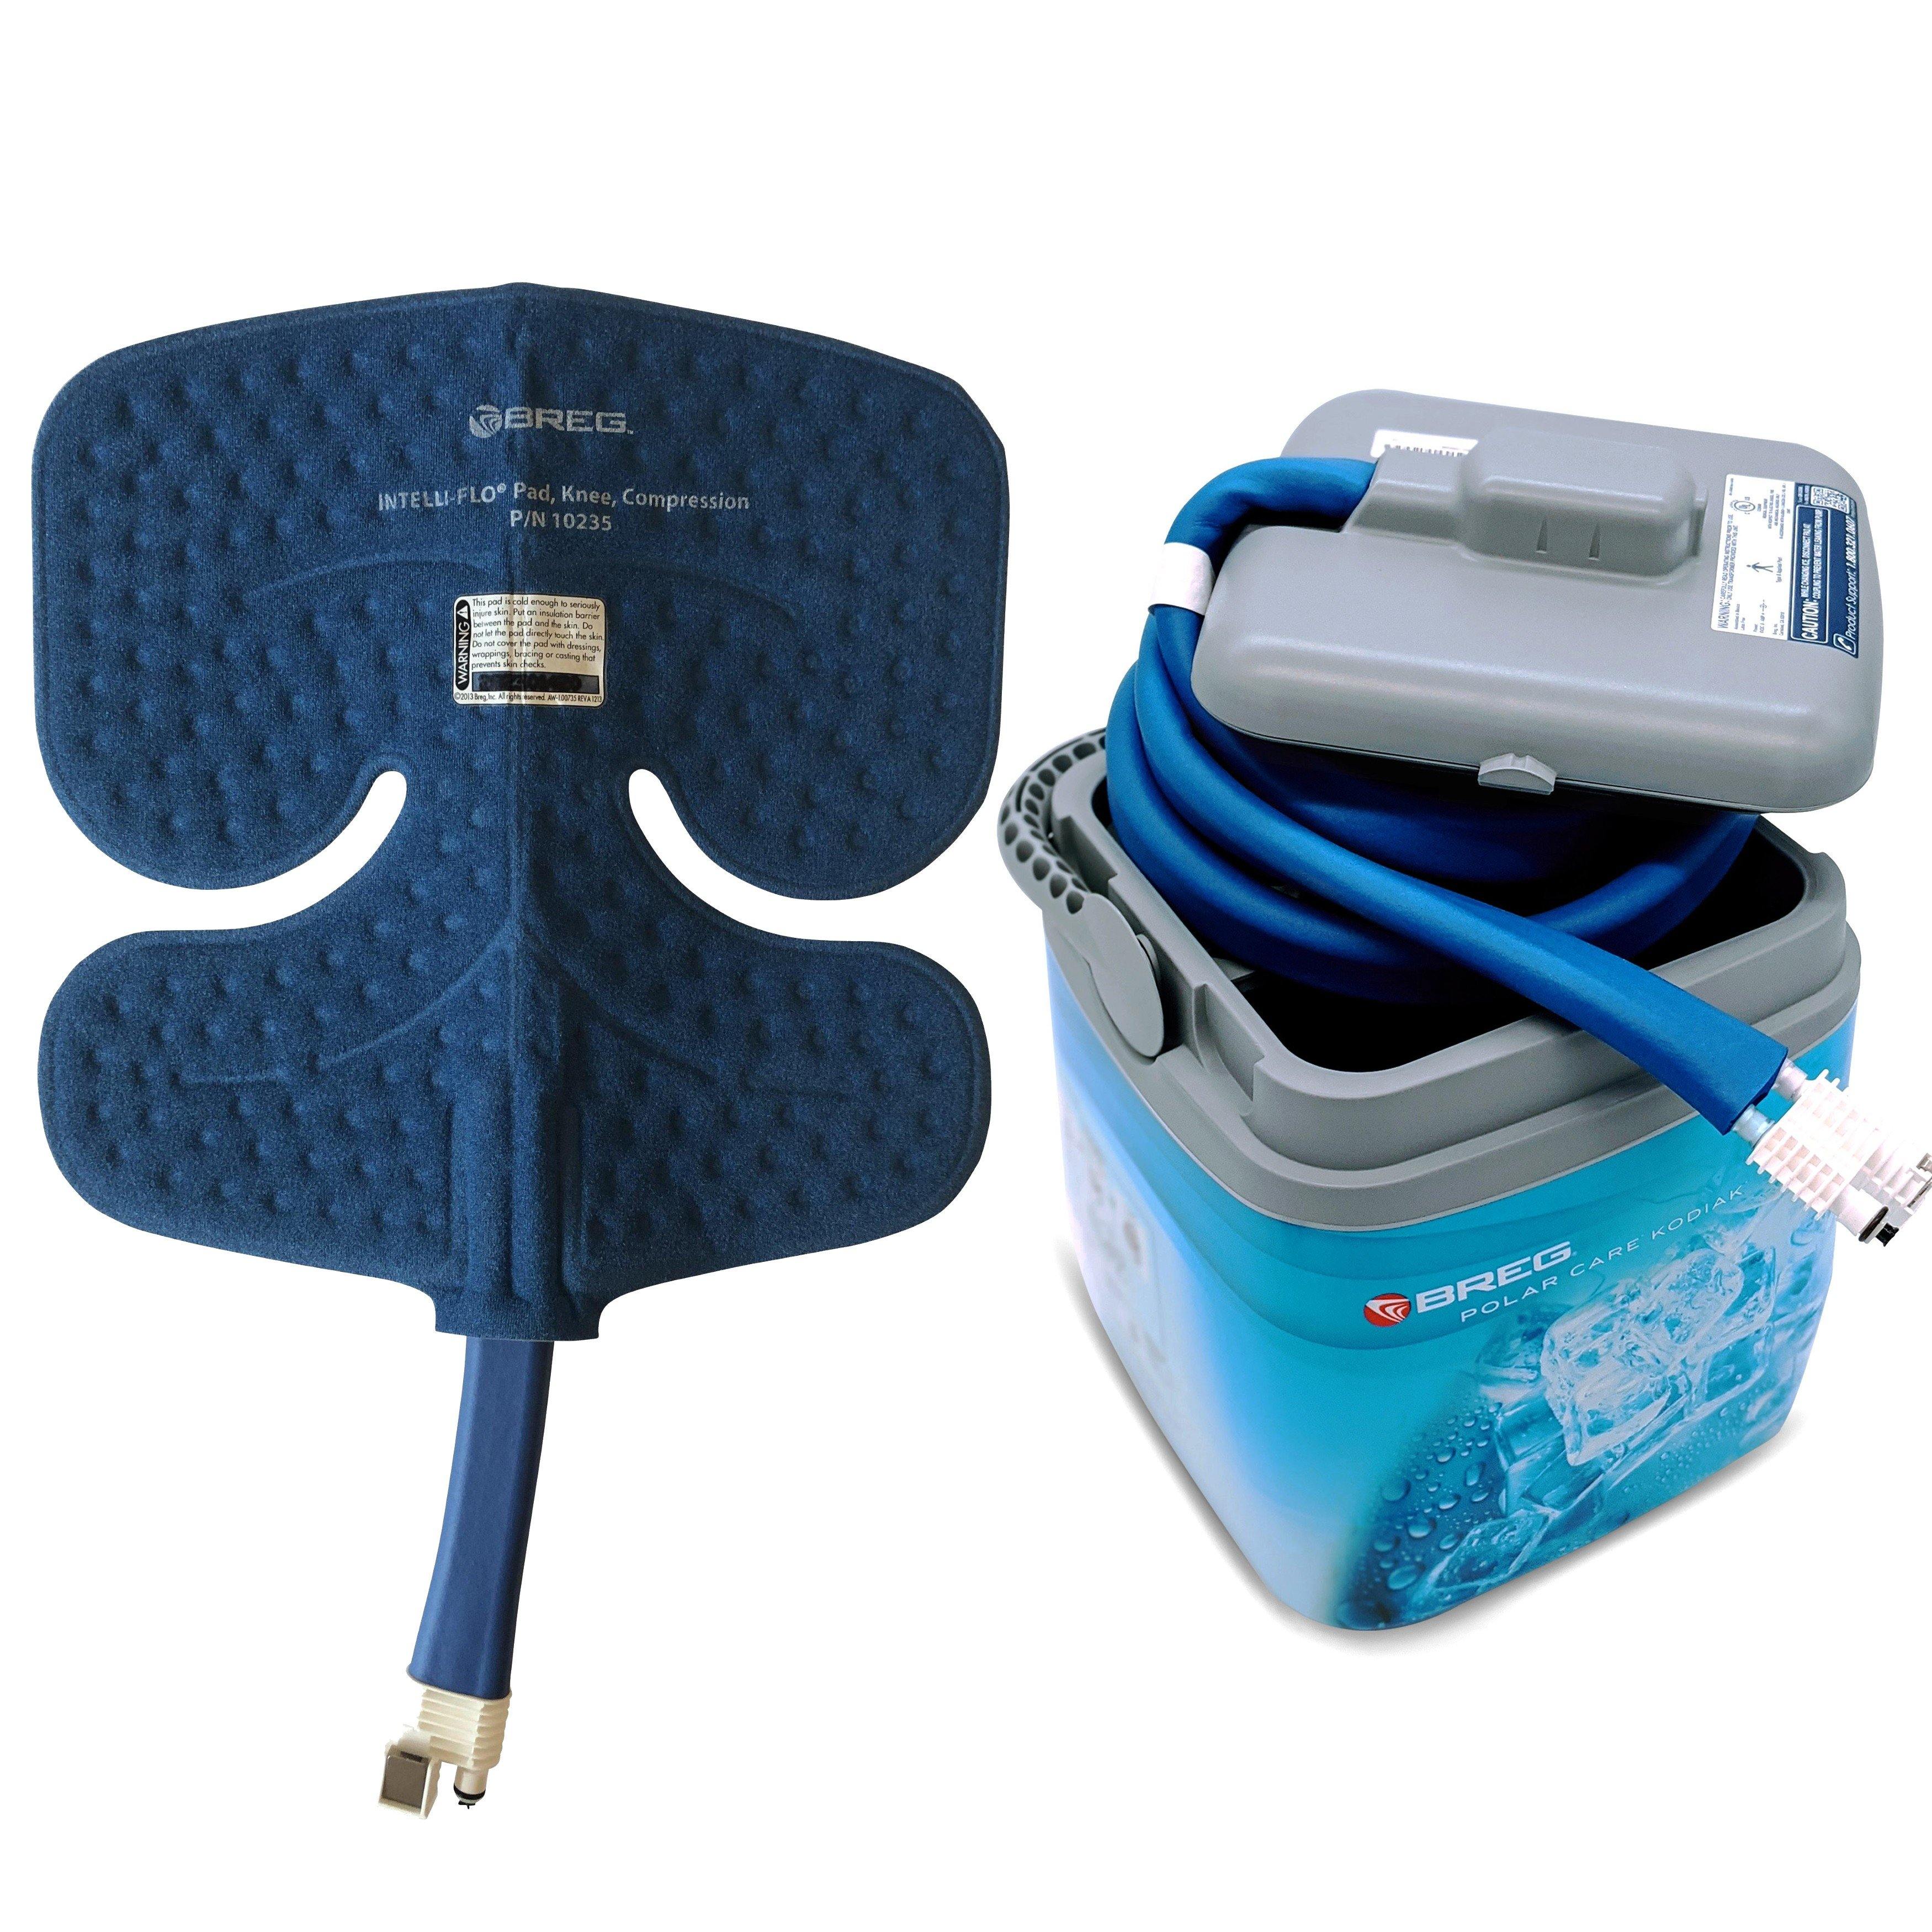 Breg® Polar Care Kodiak Cooler w/ Intelli-Flo Pads - 10601-10235 Breg® Polar Care Kodiak Cooler w/ Intelli-Flo Pads - undefined by Supply Physical Therapy Best Seller, Breg, Cold Therapy Units, DJC, Kodiak, Universal